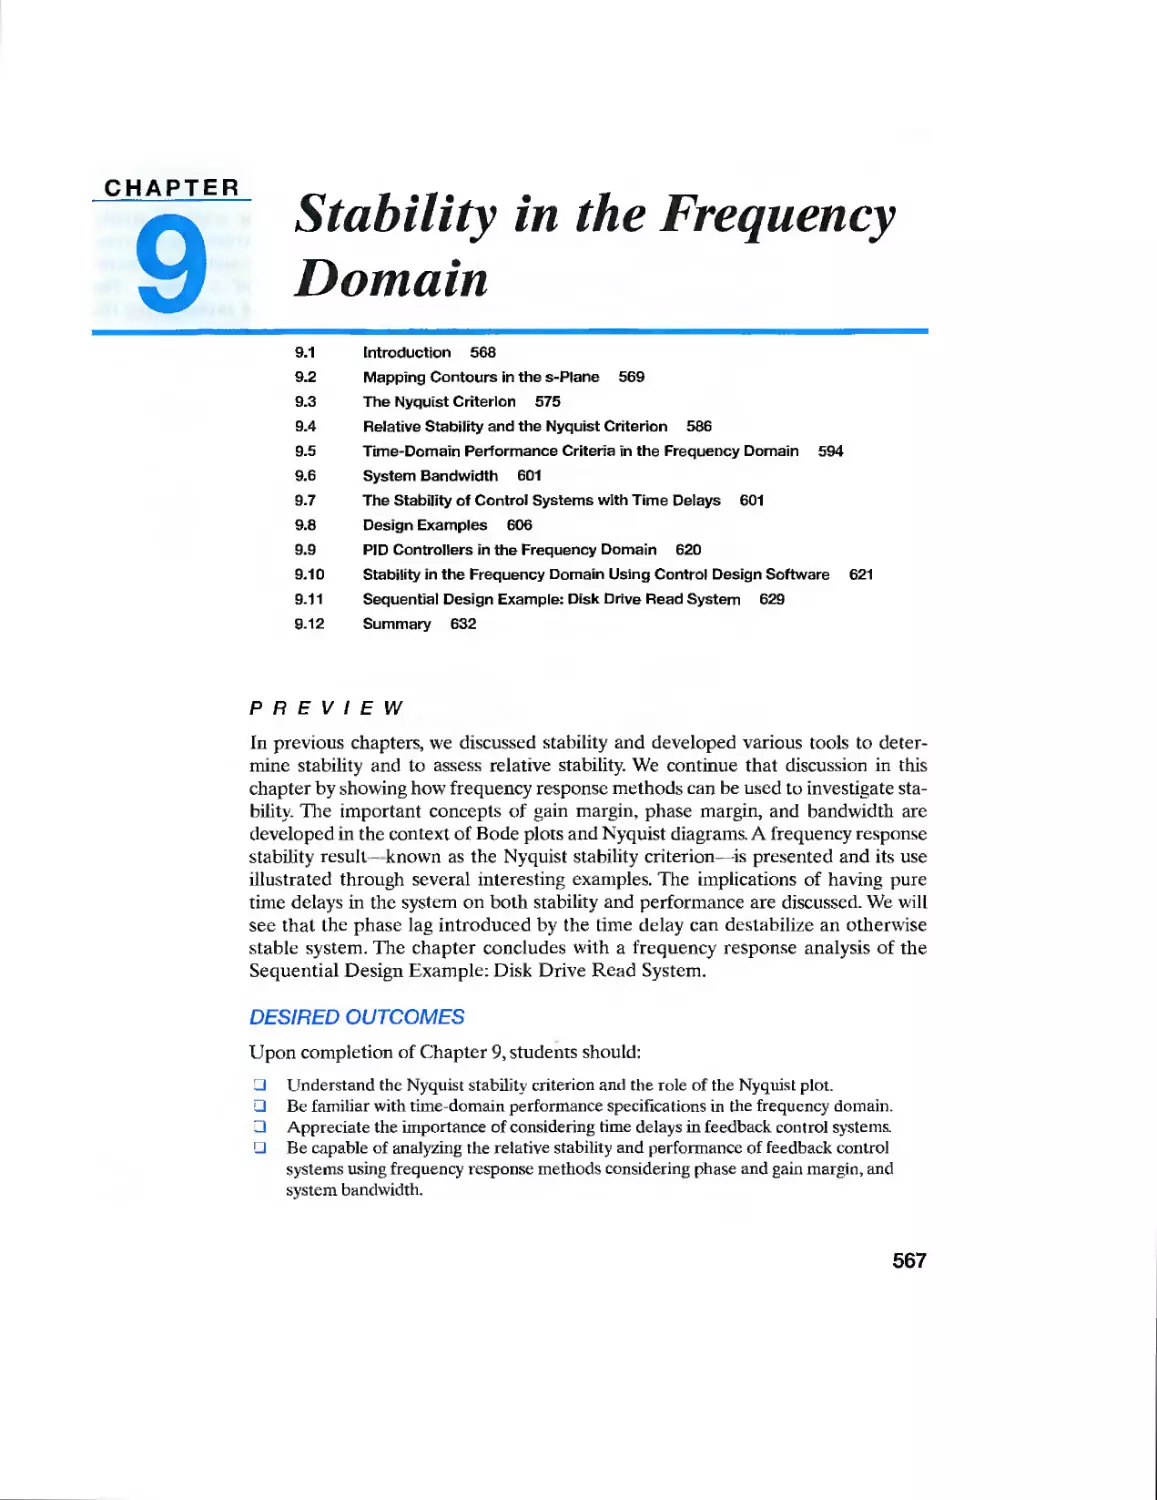 9 Stability in the Frequency Domain